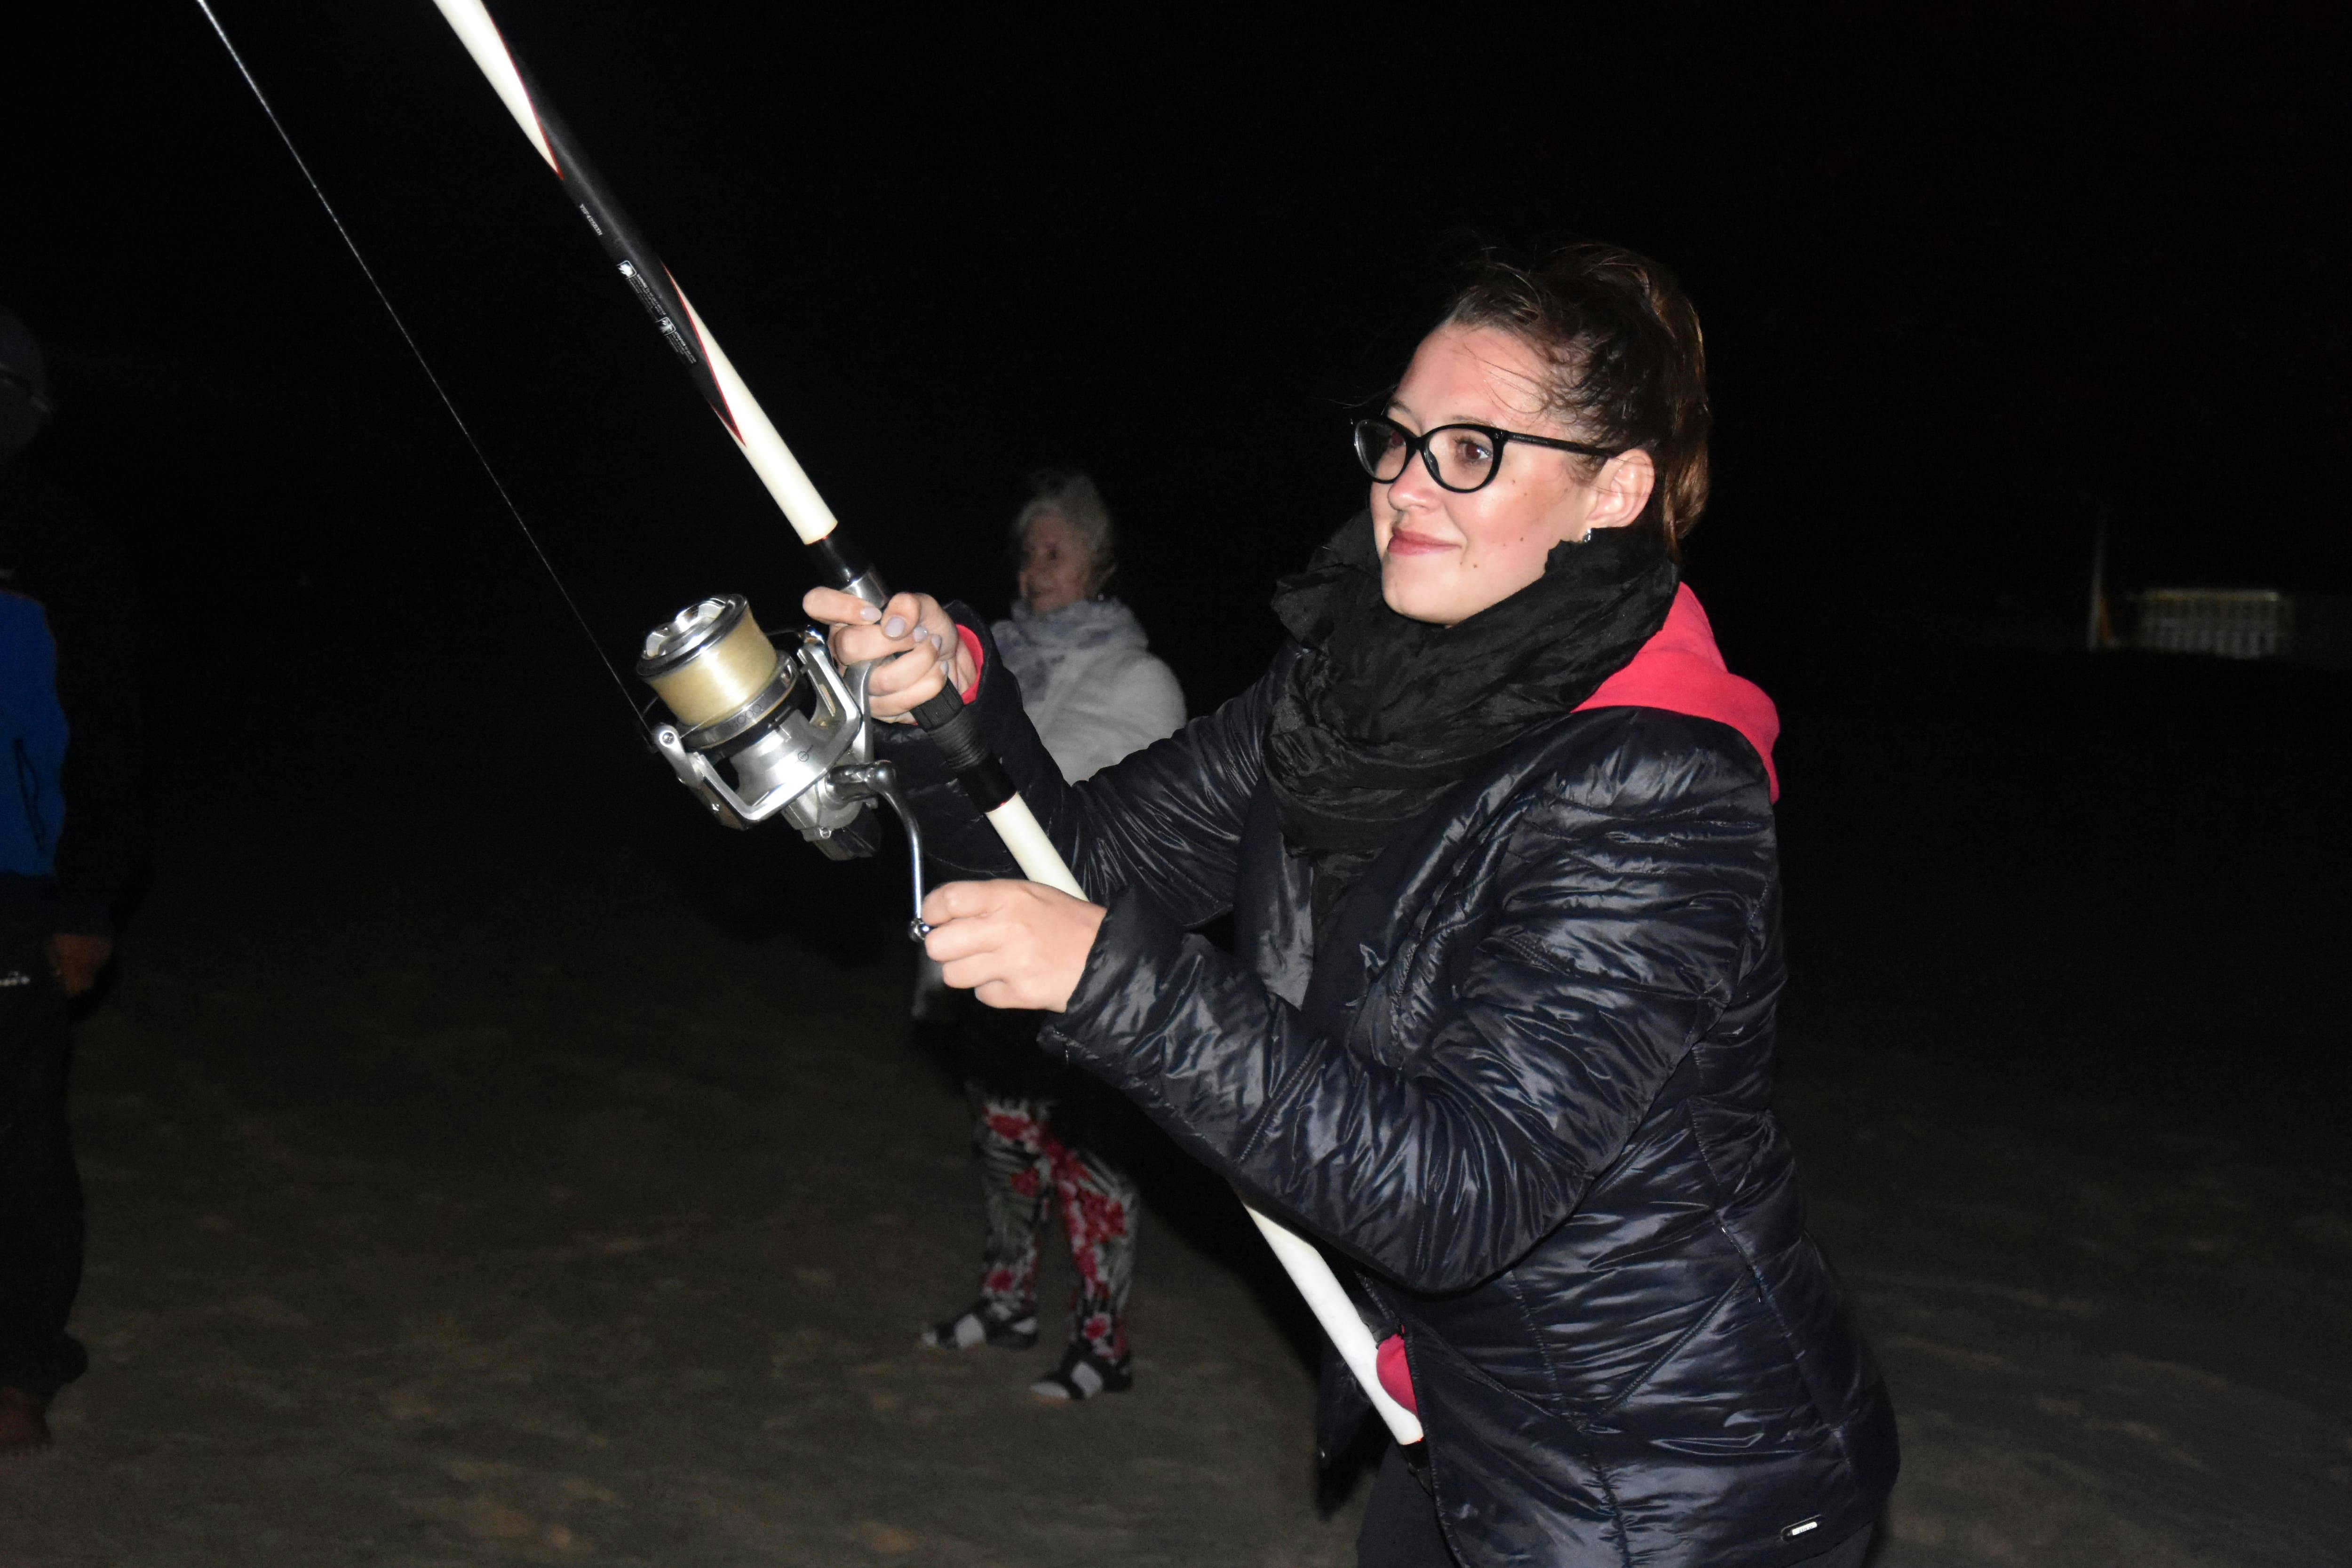 Sal Surf Casting Fishing Experience